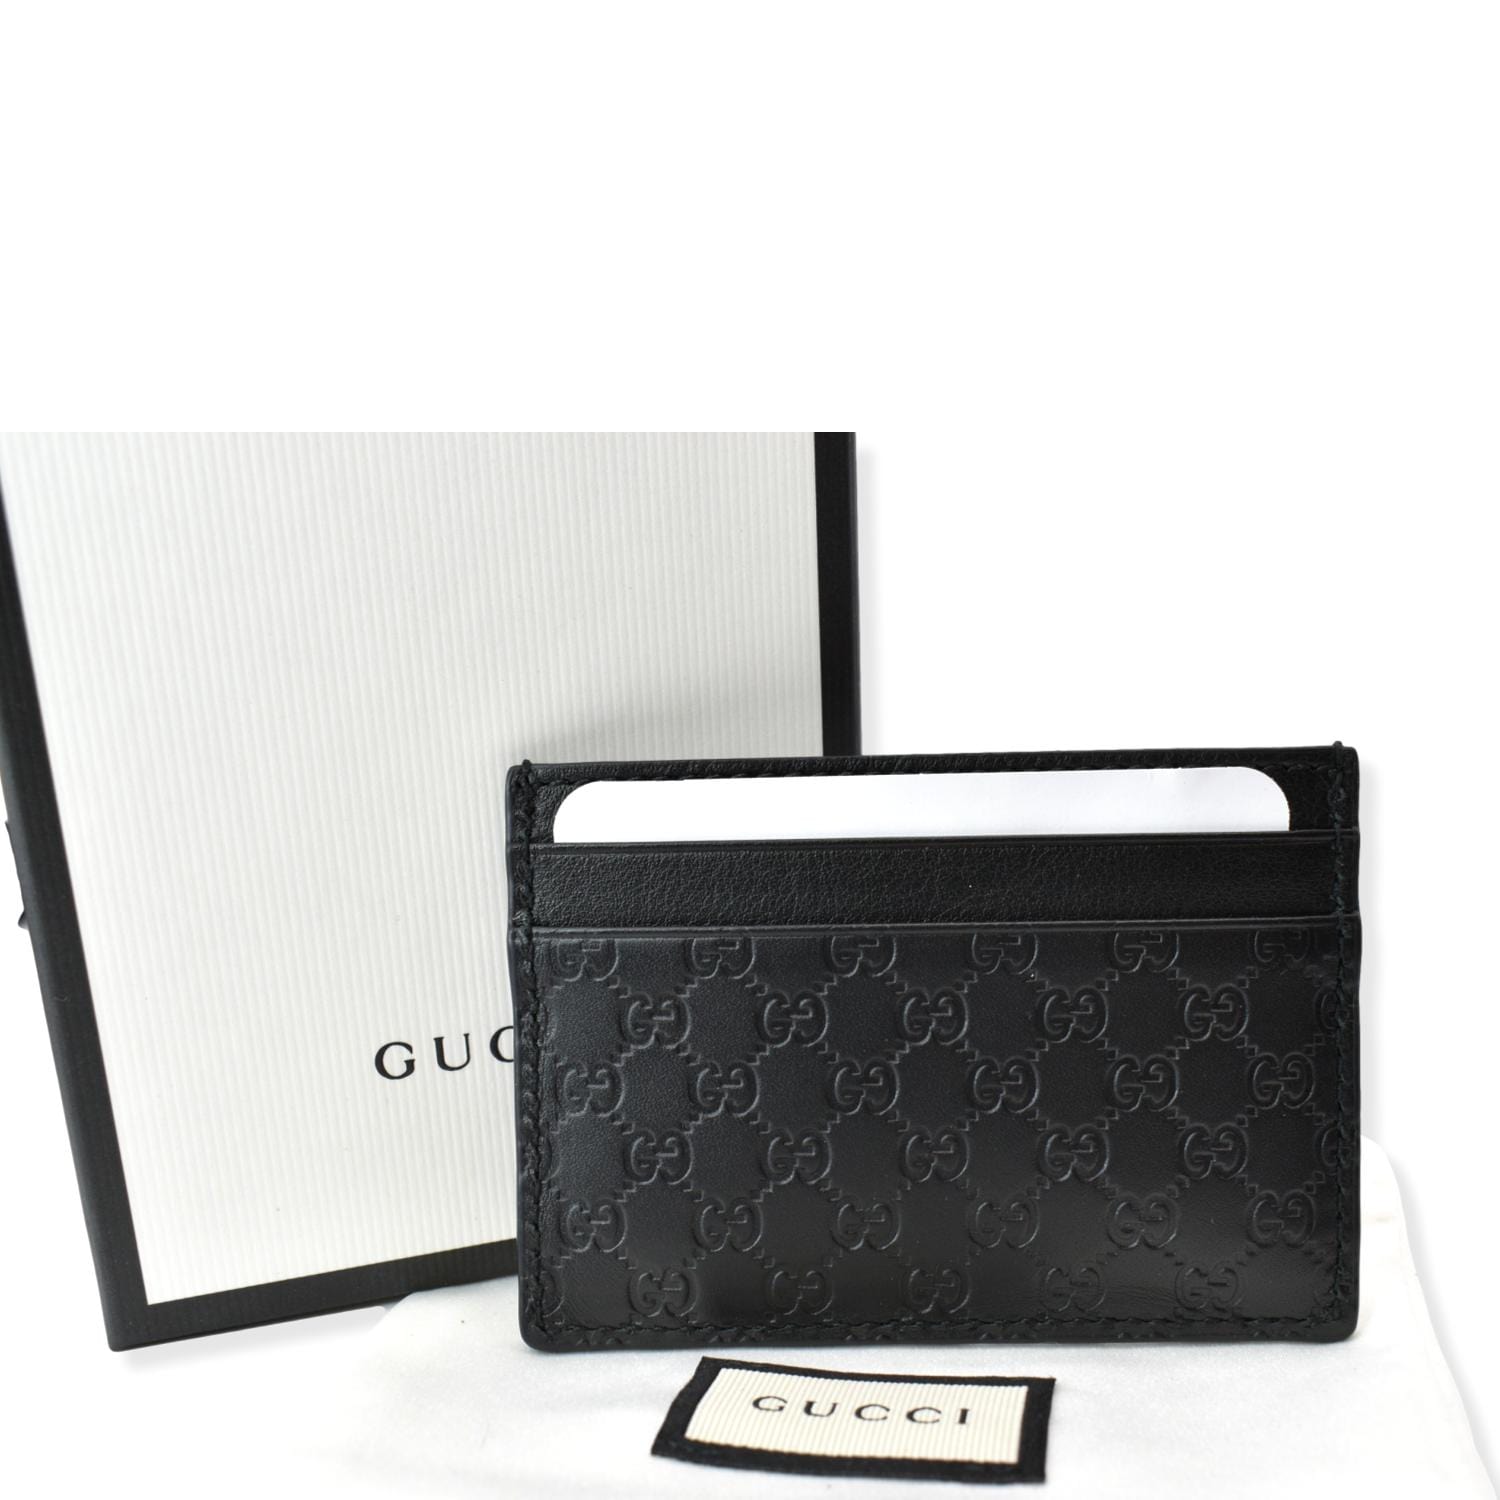 Gucci, Bags, Gucci Monogram Card Holder Wallet